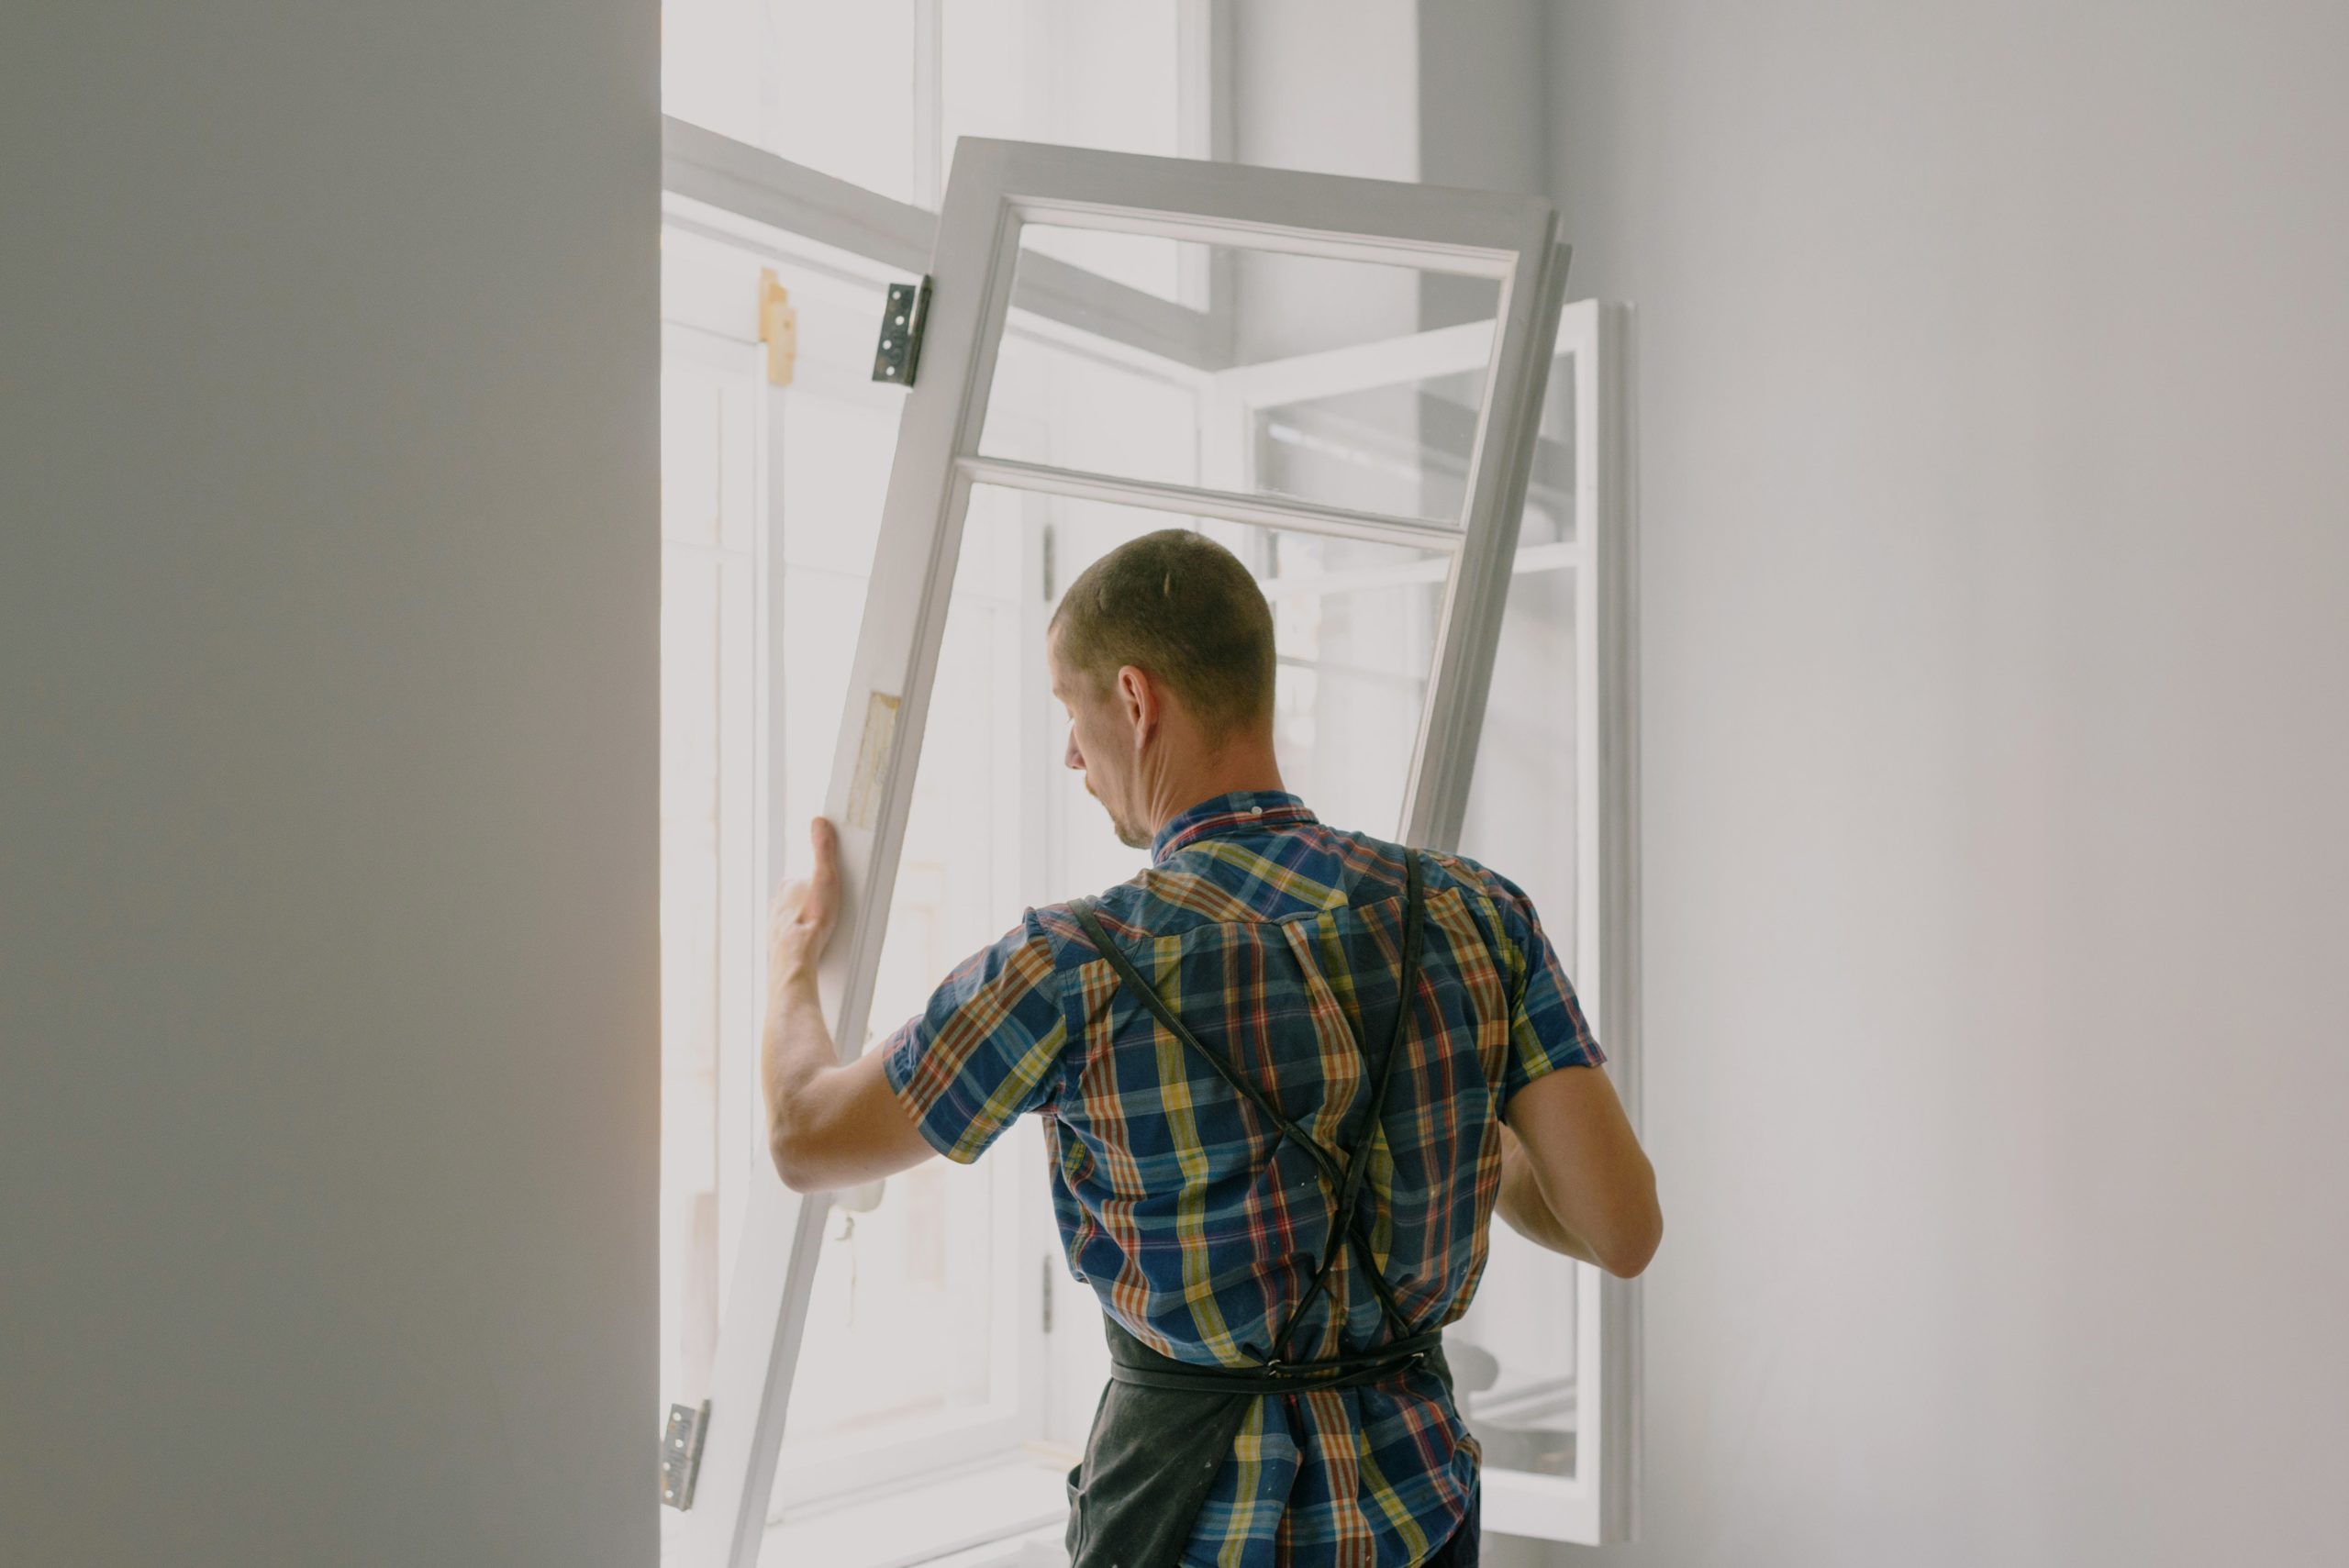 Are you looking for window installers in Oakland County? As shown here, finding a window and door company near you is important to ensure they understand how they weather will affect the window installation.